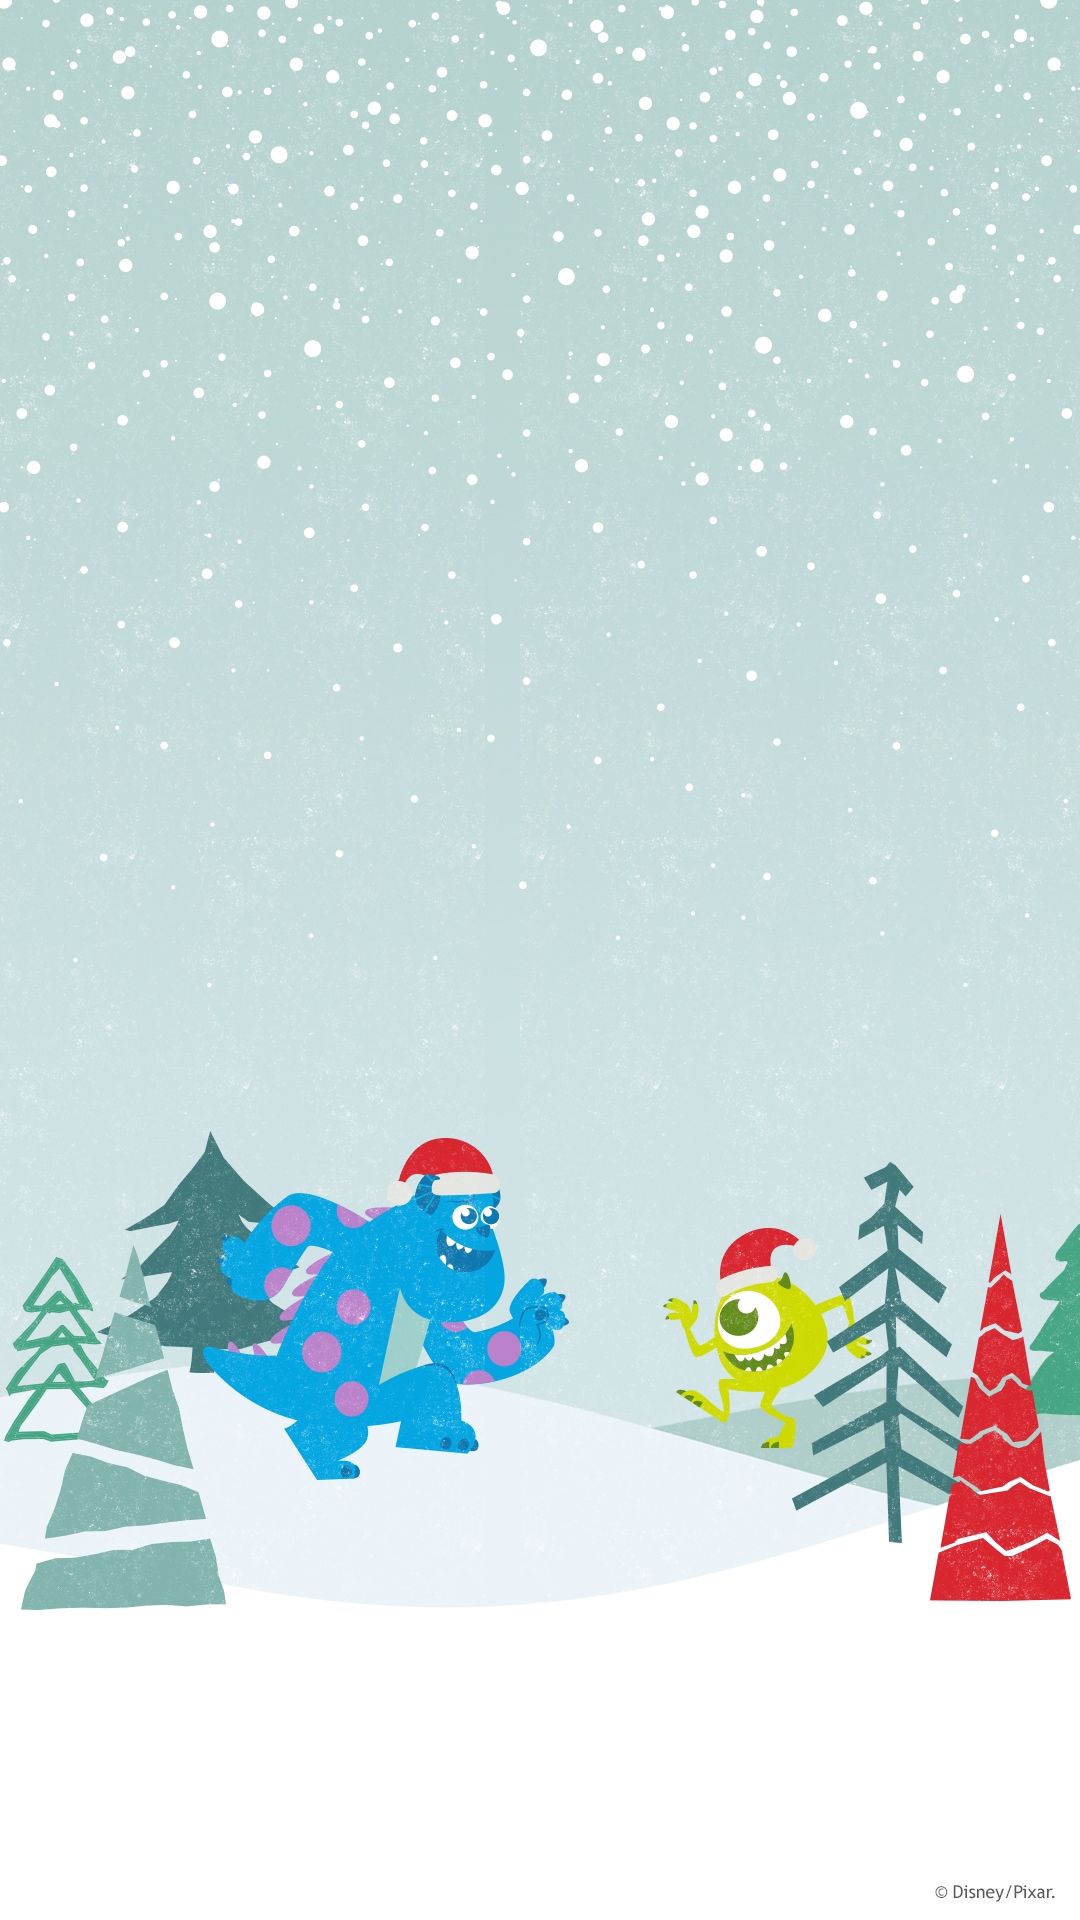 2021 Pixar Holiday Wallpaper – iPhone/Android/Apple Watch | Disney Parks  Blog